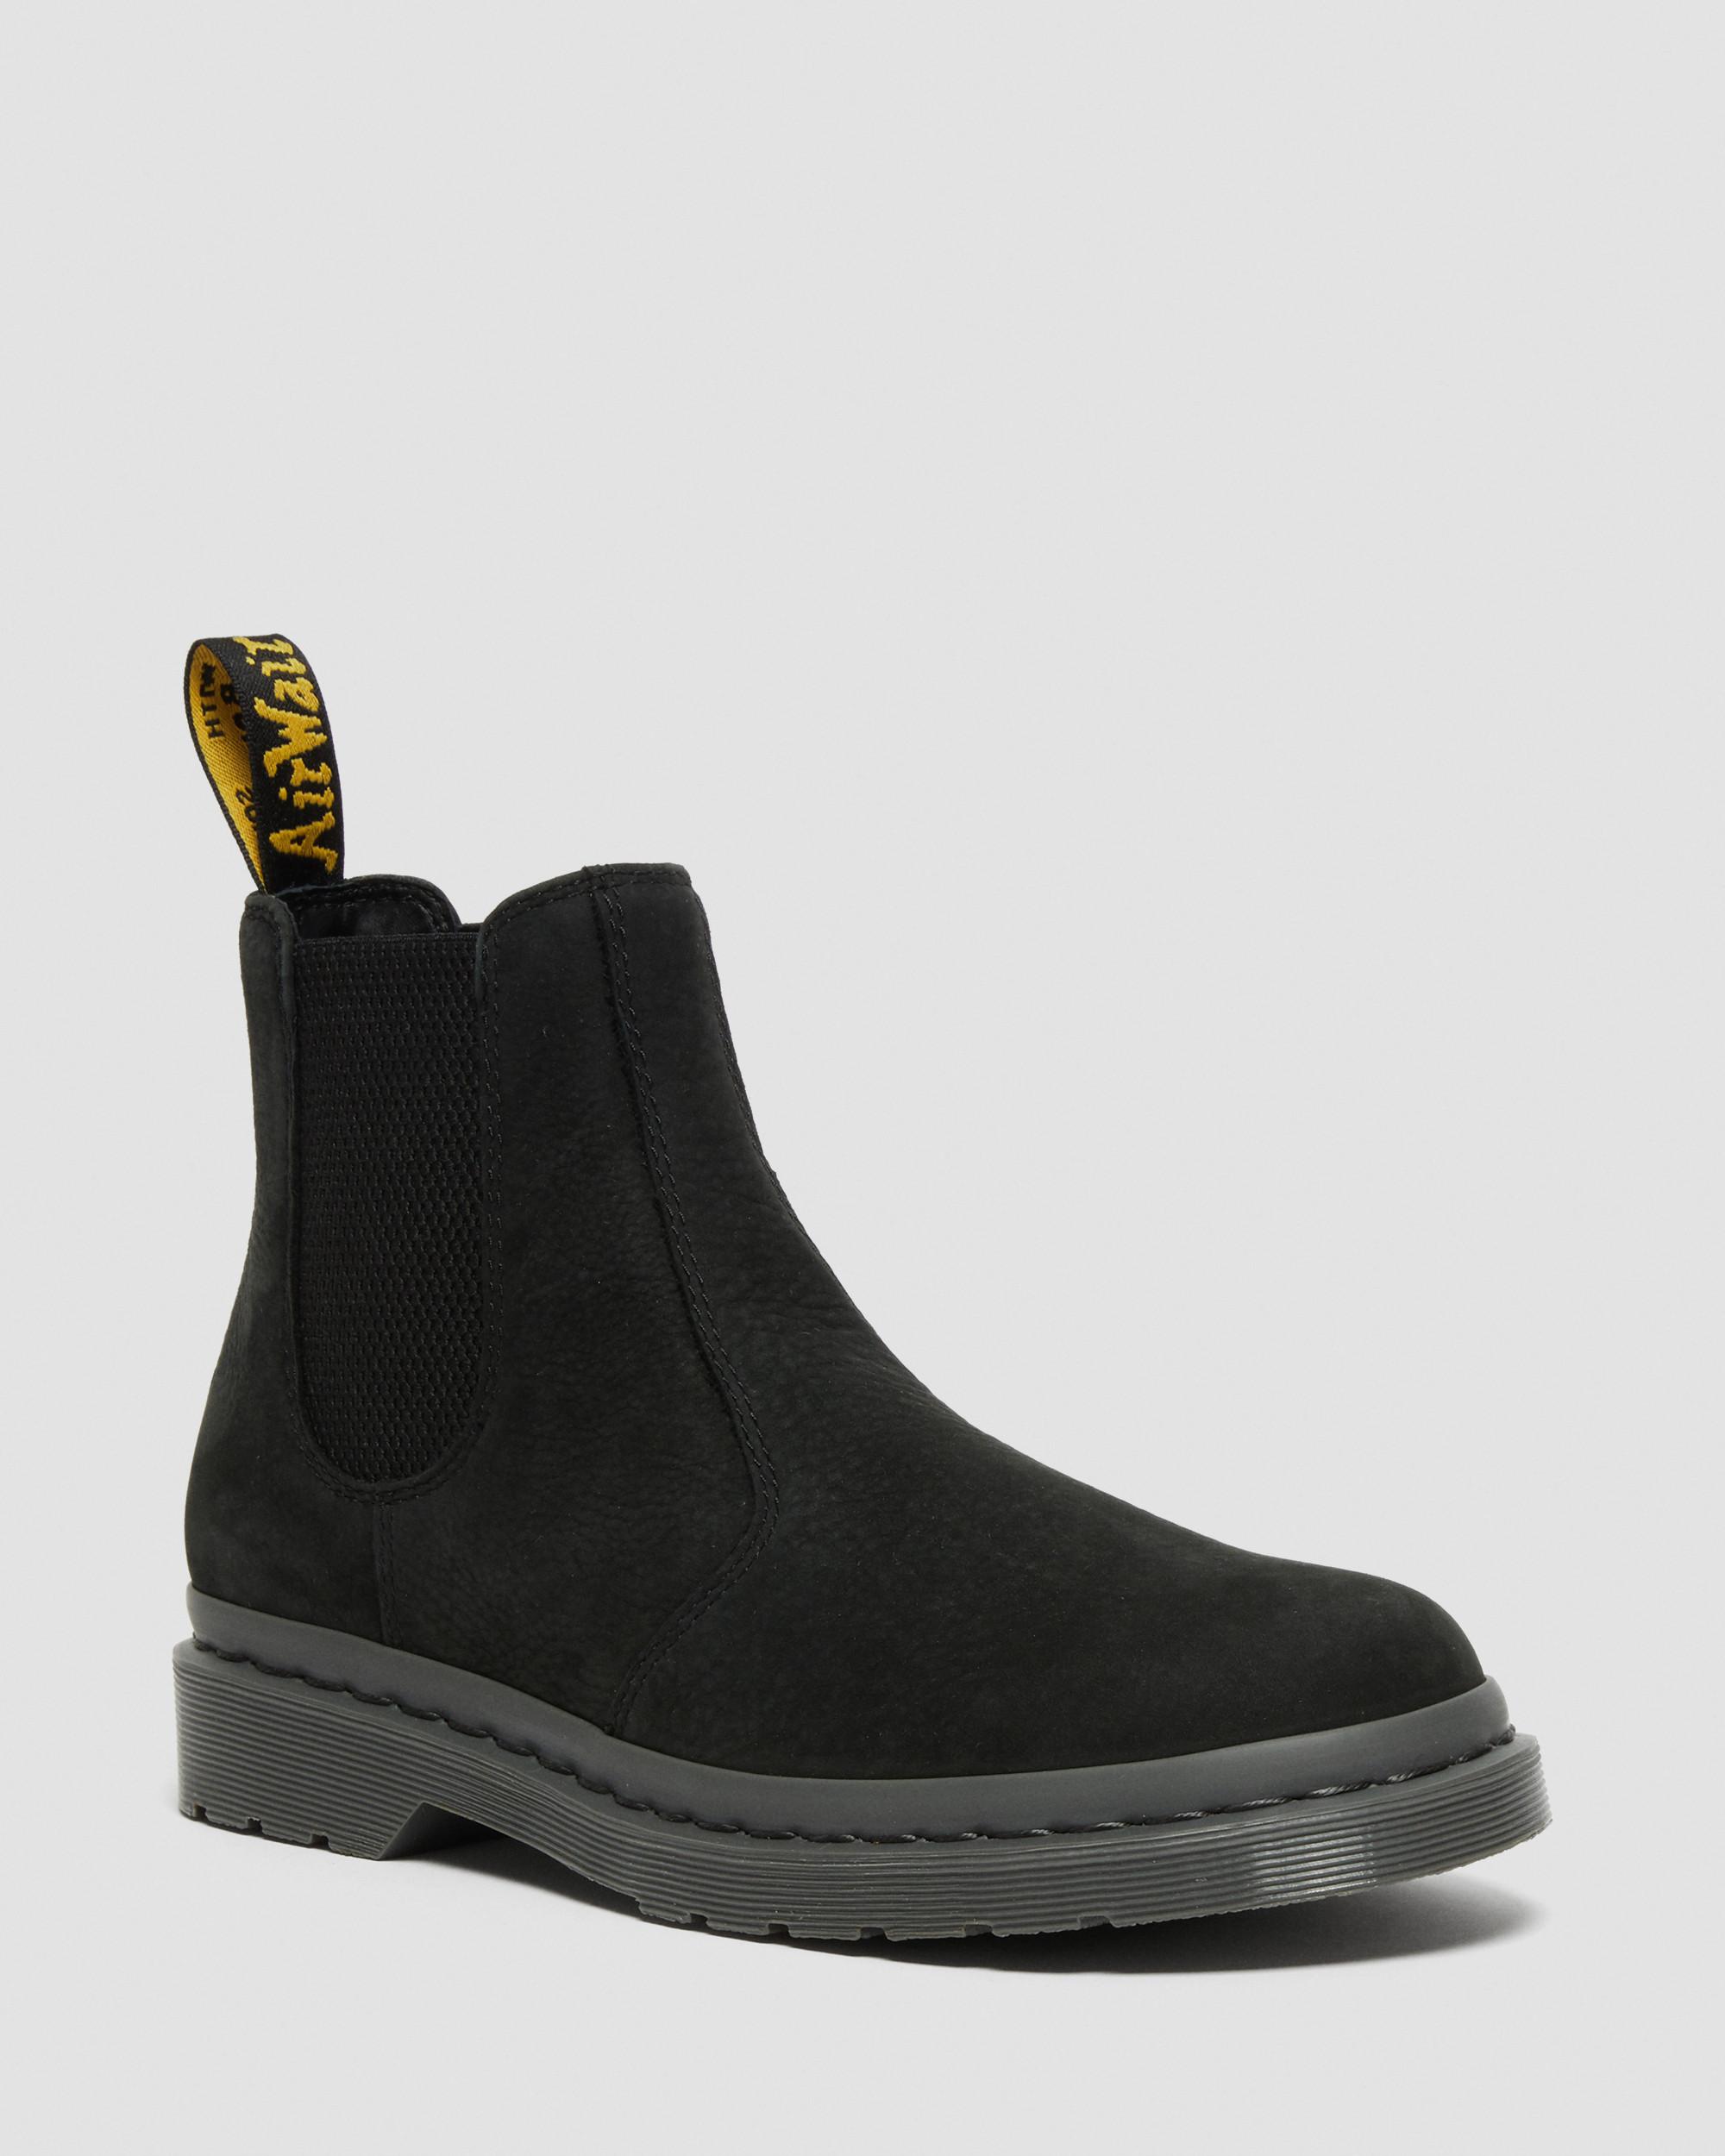 2976 Mono Milled Nubuck Leather Chelsea Boots, Black | Dr. Martens